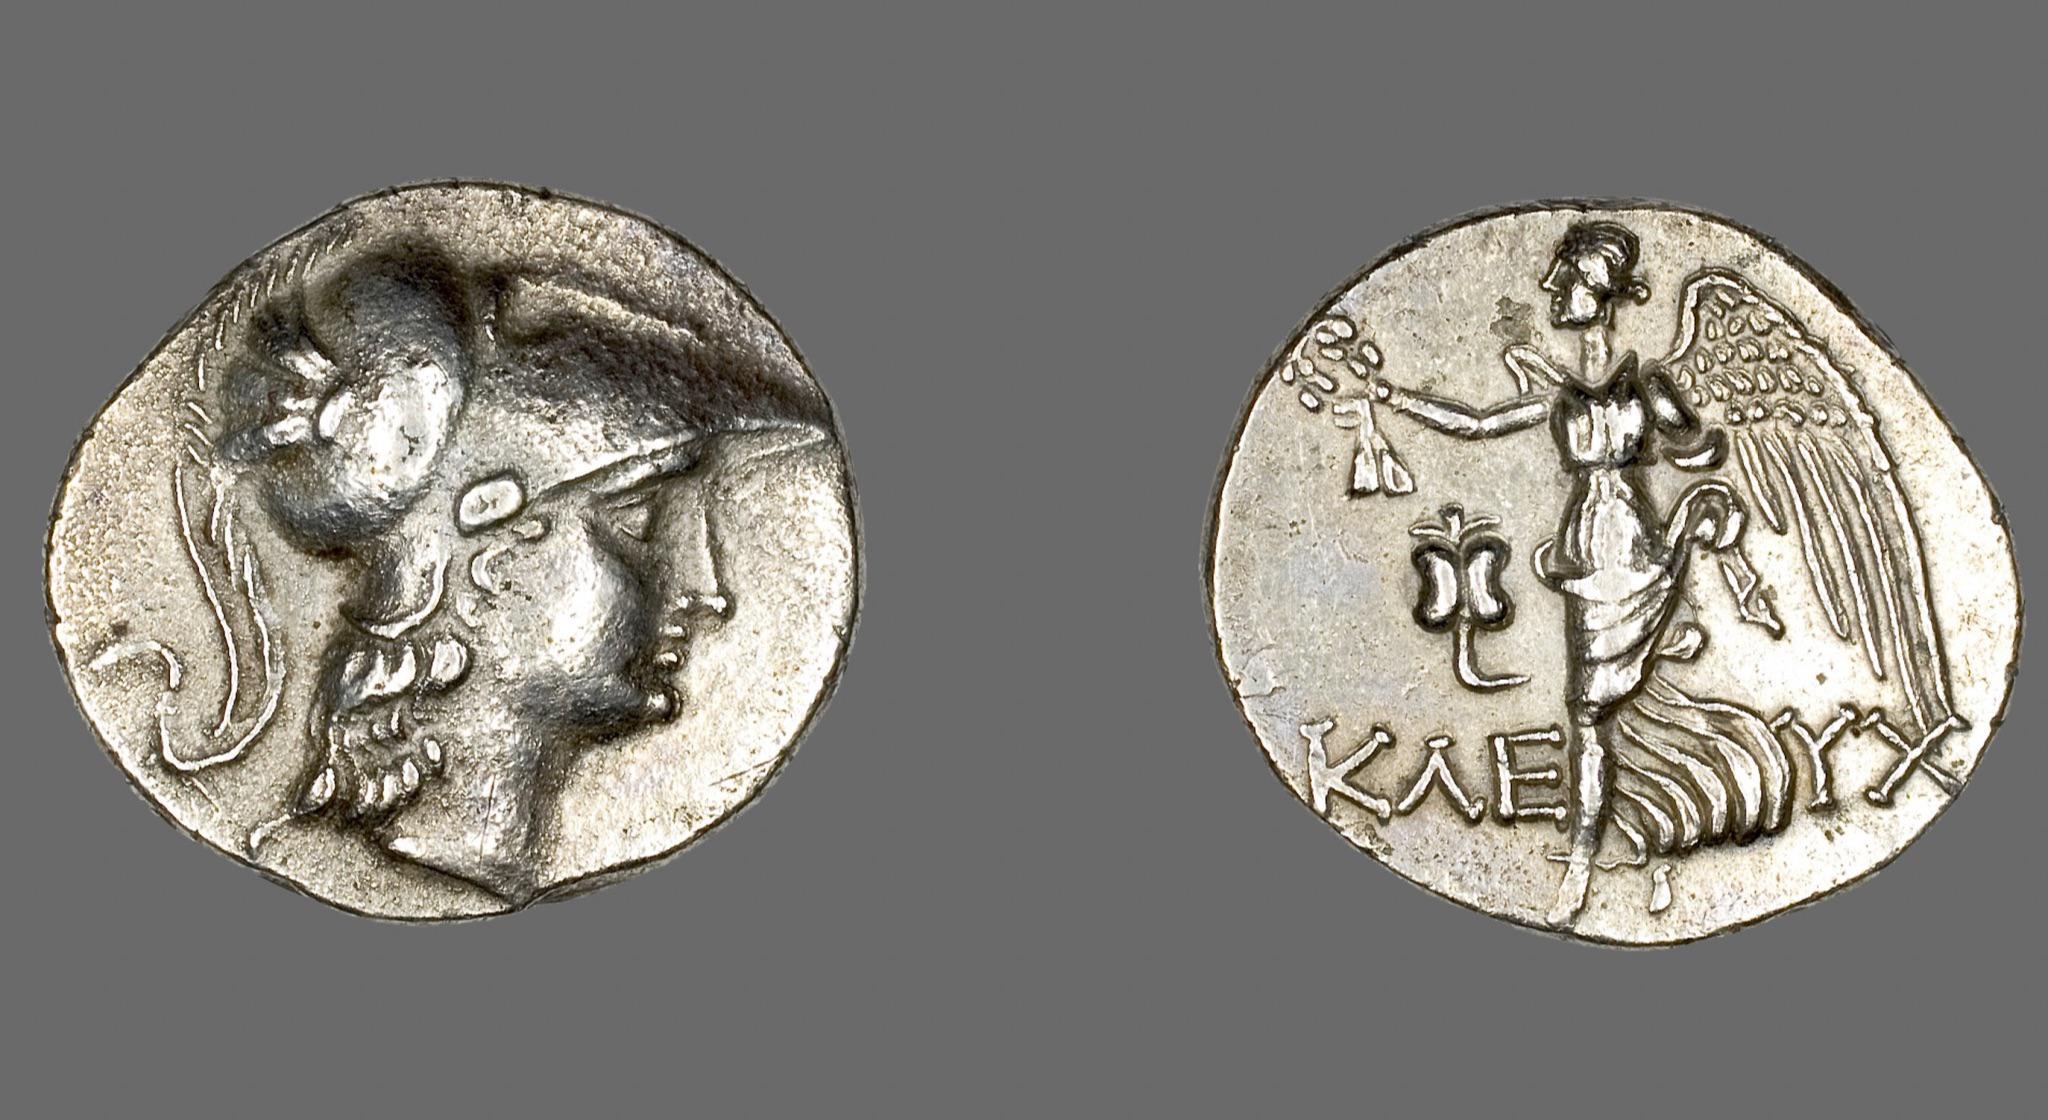 Tetradrachm (Coin) Depicting the Goddess Athena from Ancient Greece (190-36 BCE).jpg